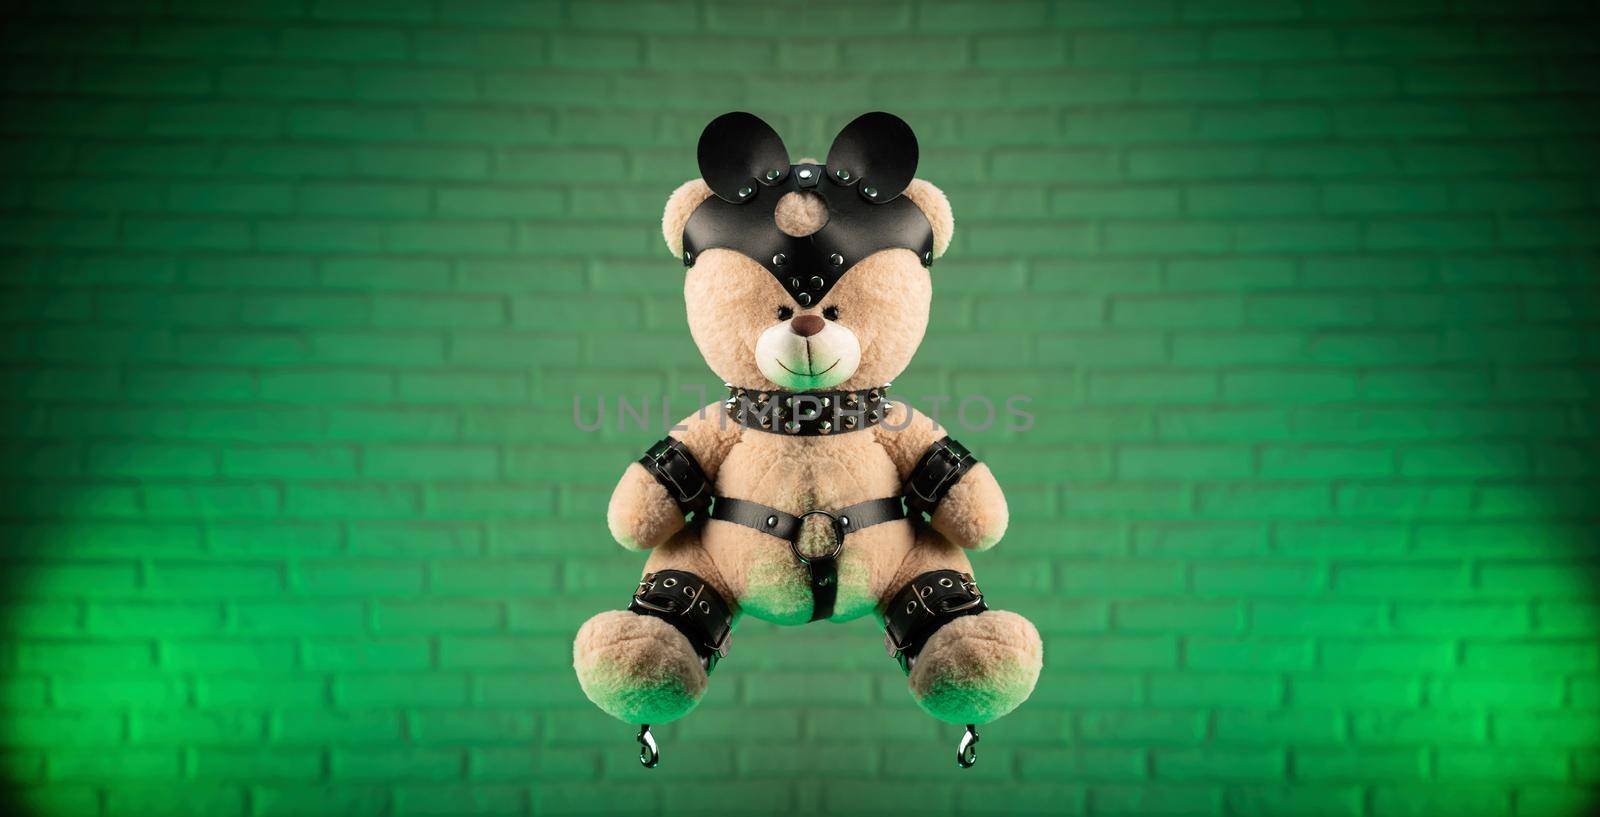 the toy Teddy bear dressed in leather belts and mask accessory for BDSM games on a light background texture of a brick wall